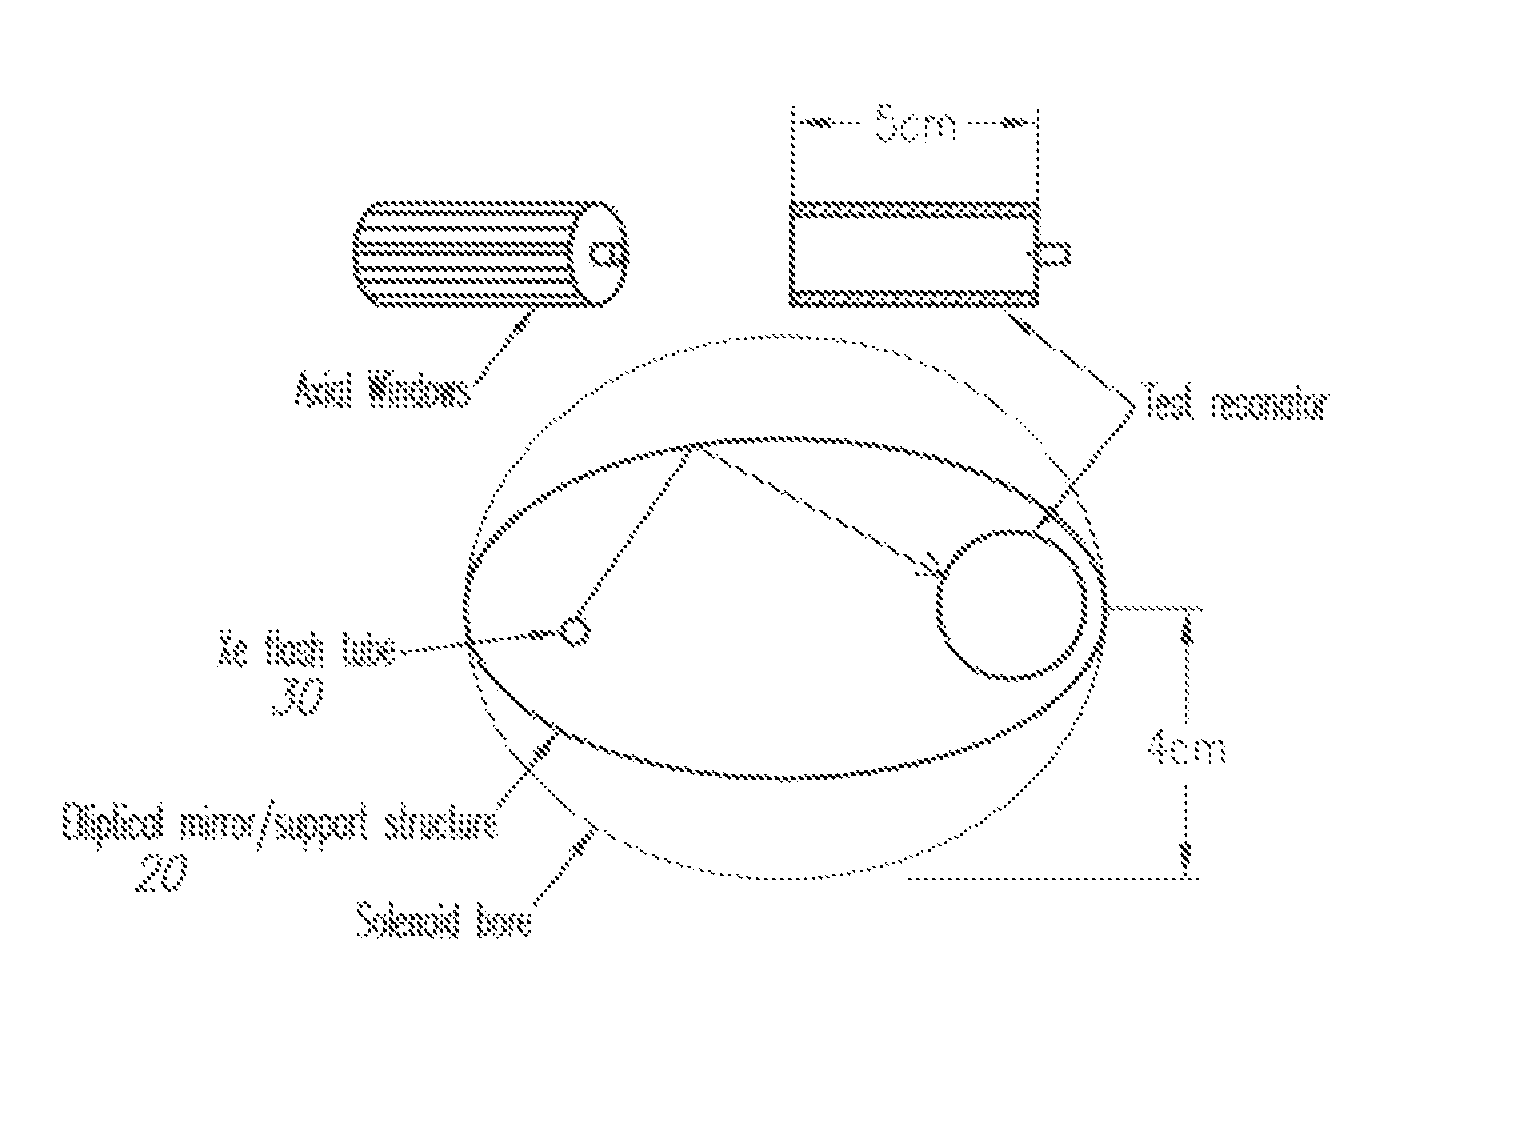 Optically pumped magnetically controlled paramagnetic devices for microwave electronics and particle accelerator applications